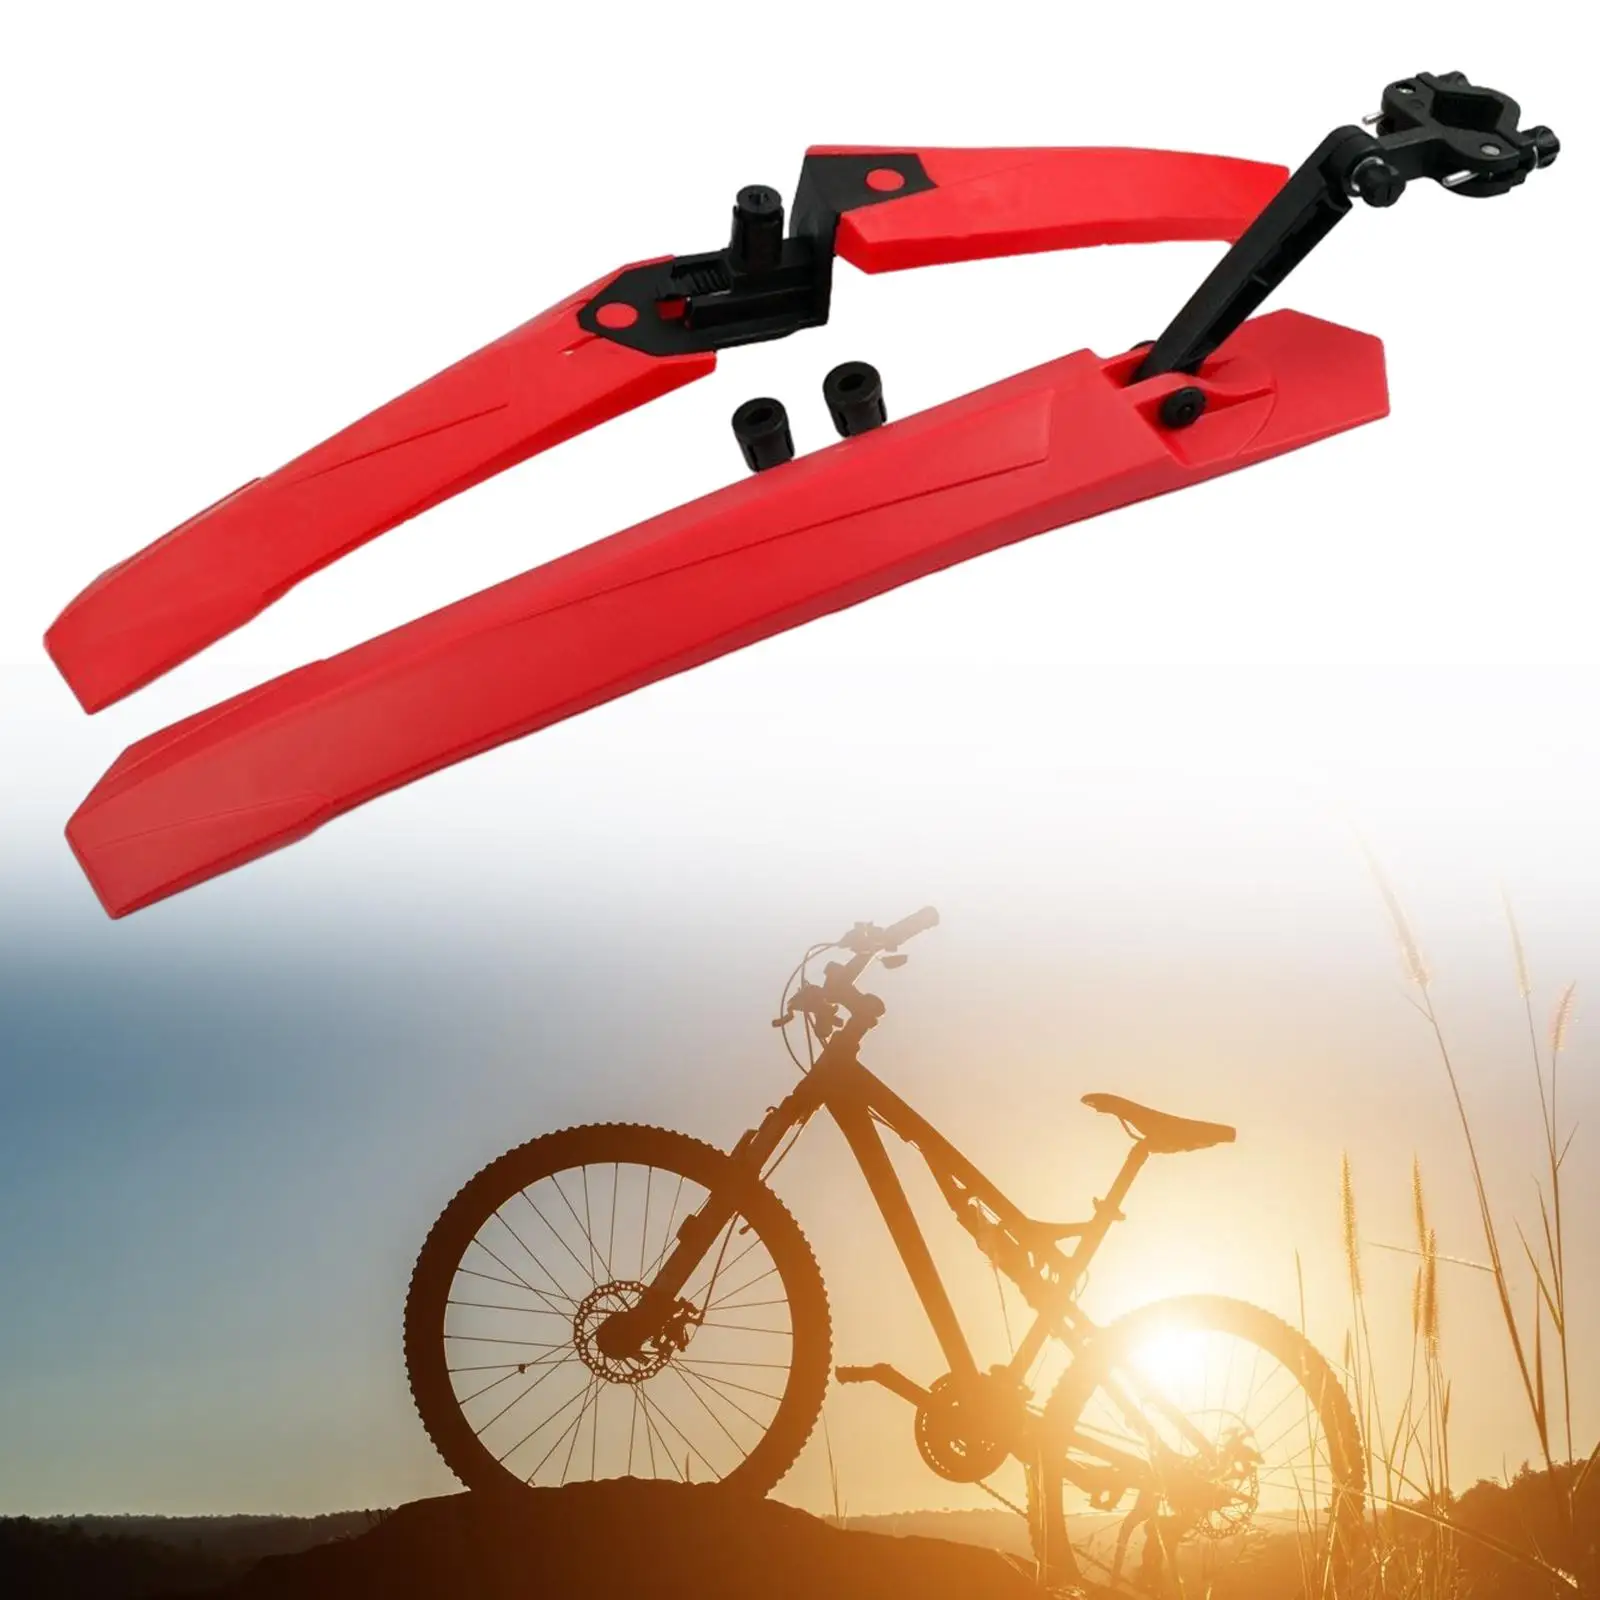 Bike Mudguard Front Rear Set Bicycle Mud Guard Easy to Install Durable Bike Front & Rear Fenders for Riding Repair Parts Accs